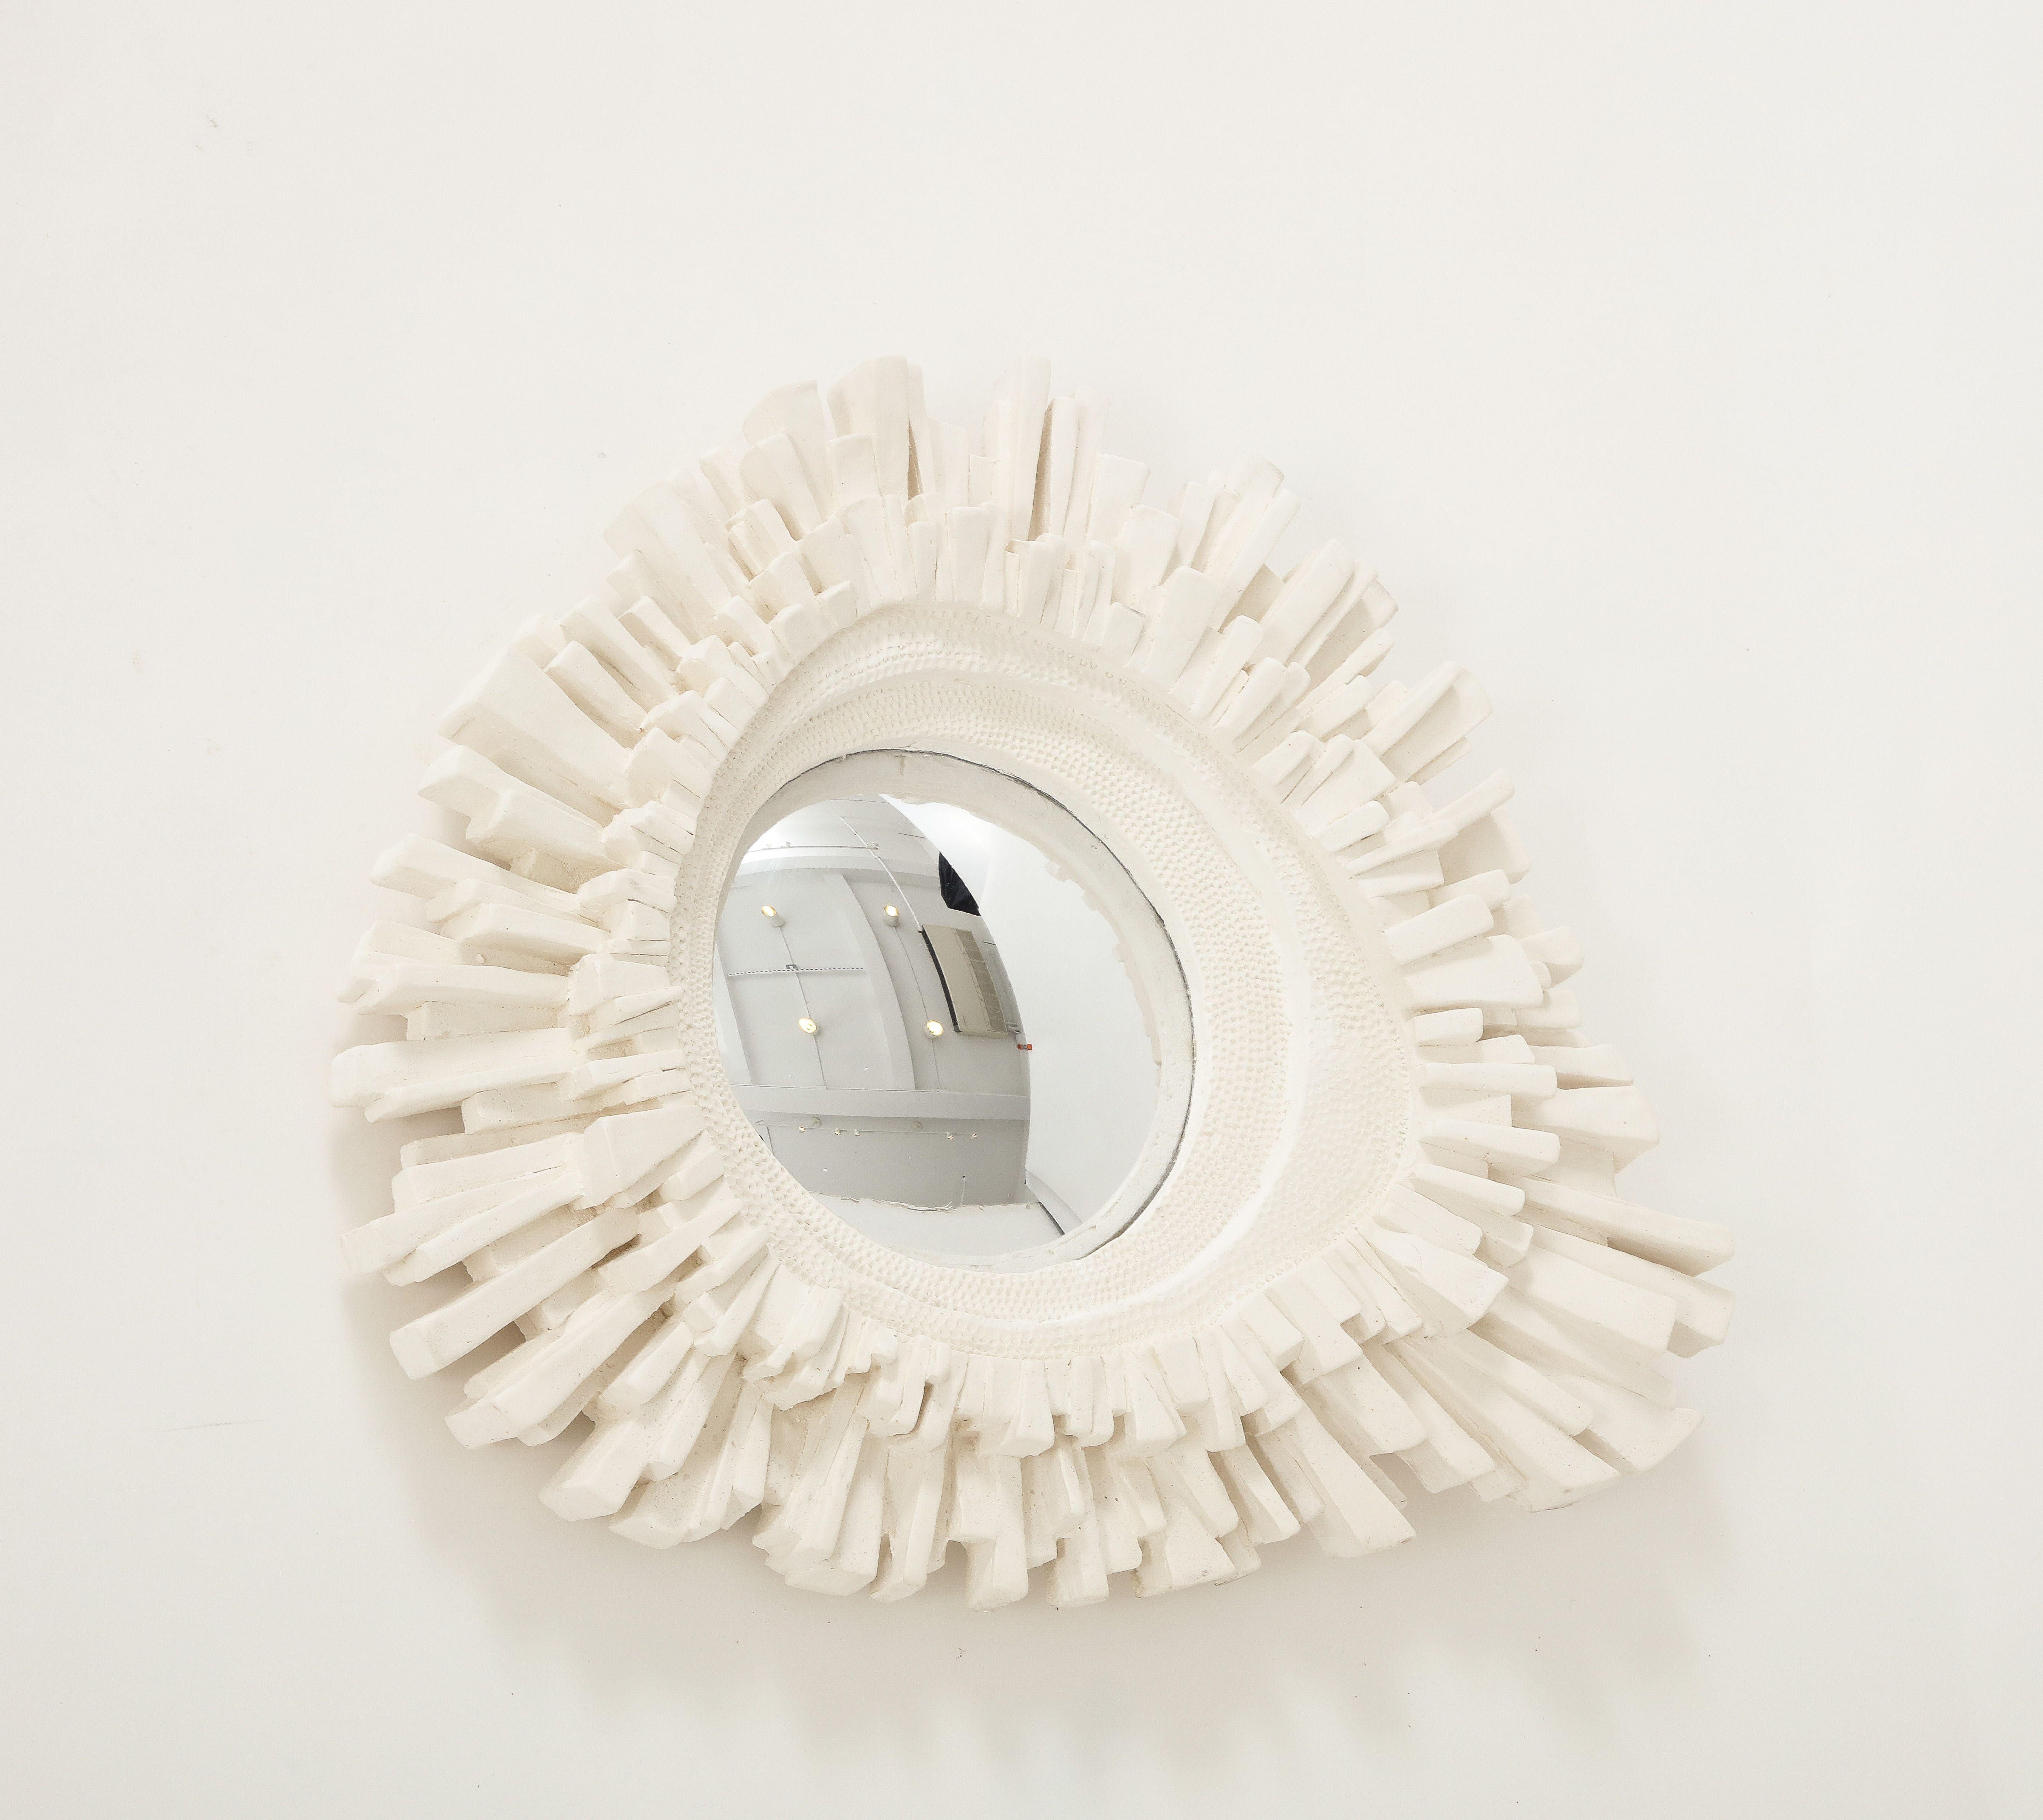 One of a series in our inventory, this carved plaster mirror with convex glass is stunning on its own or as part of a collection. its asymmetrical shape and interesting texture make it a unique piece, suitable for a traditional or contemporary